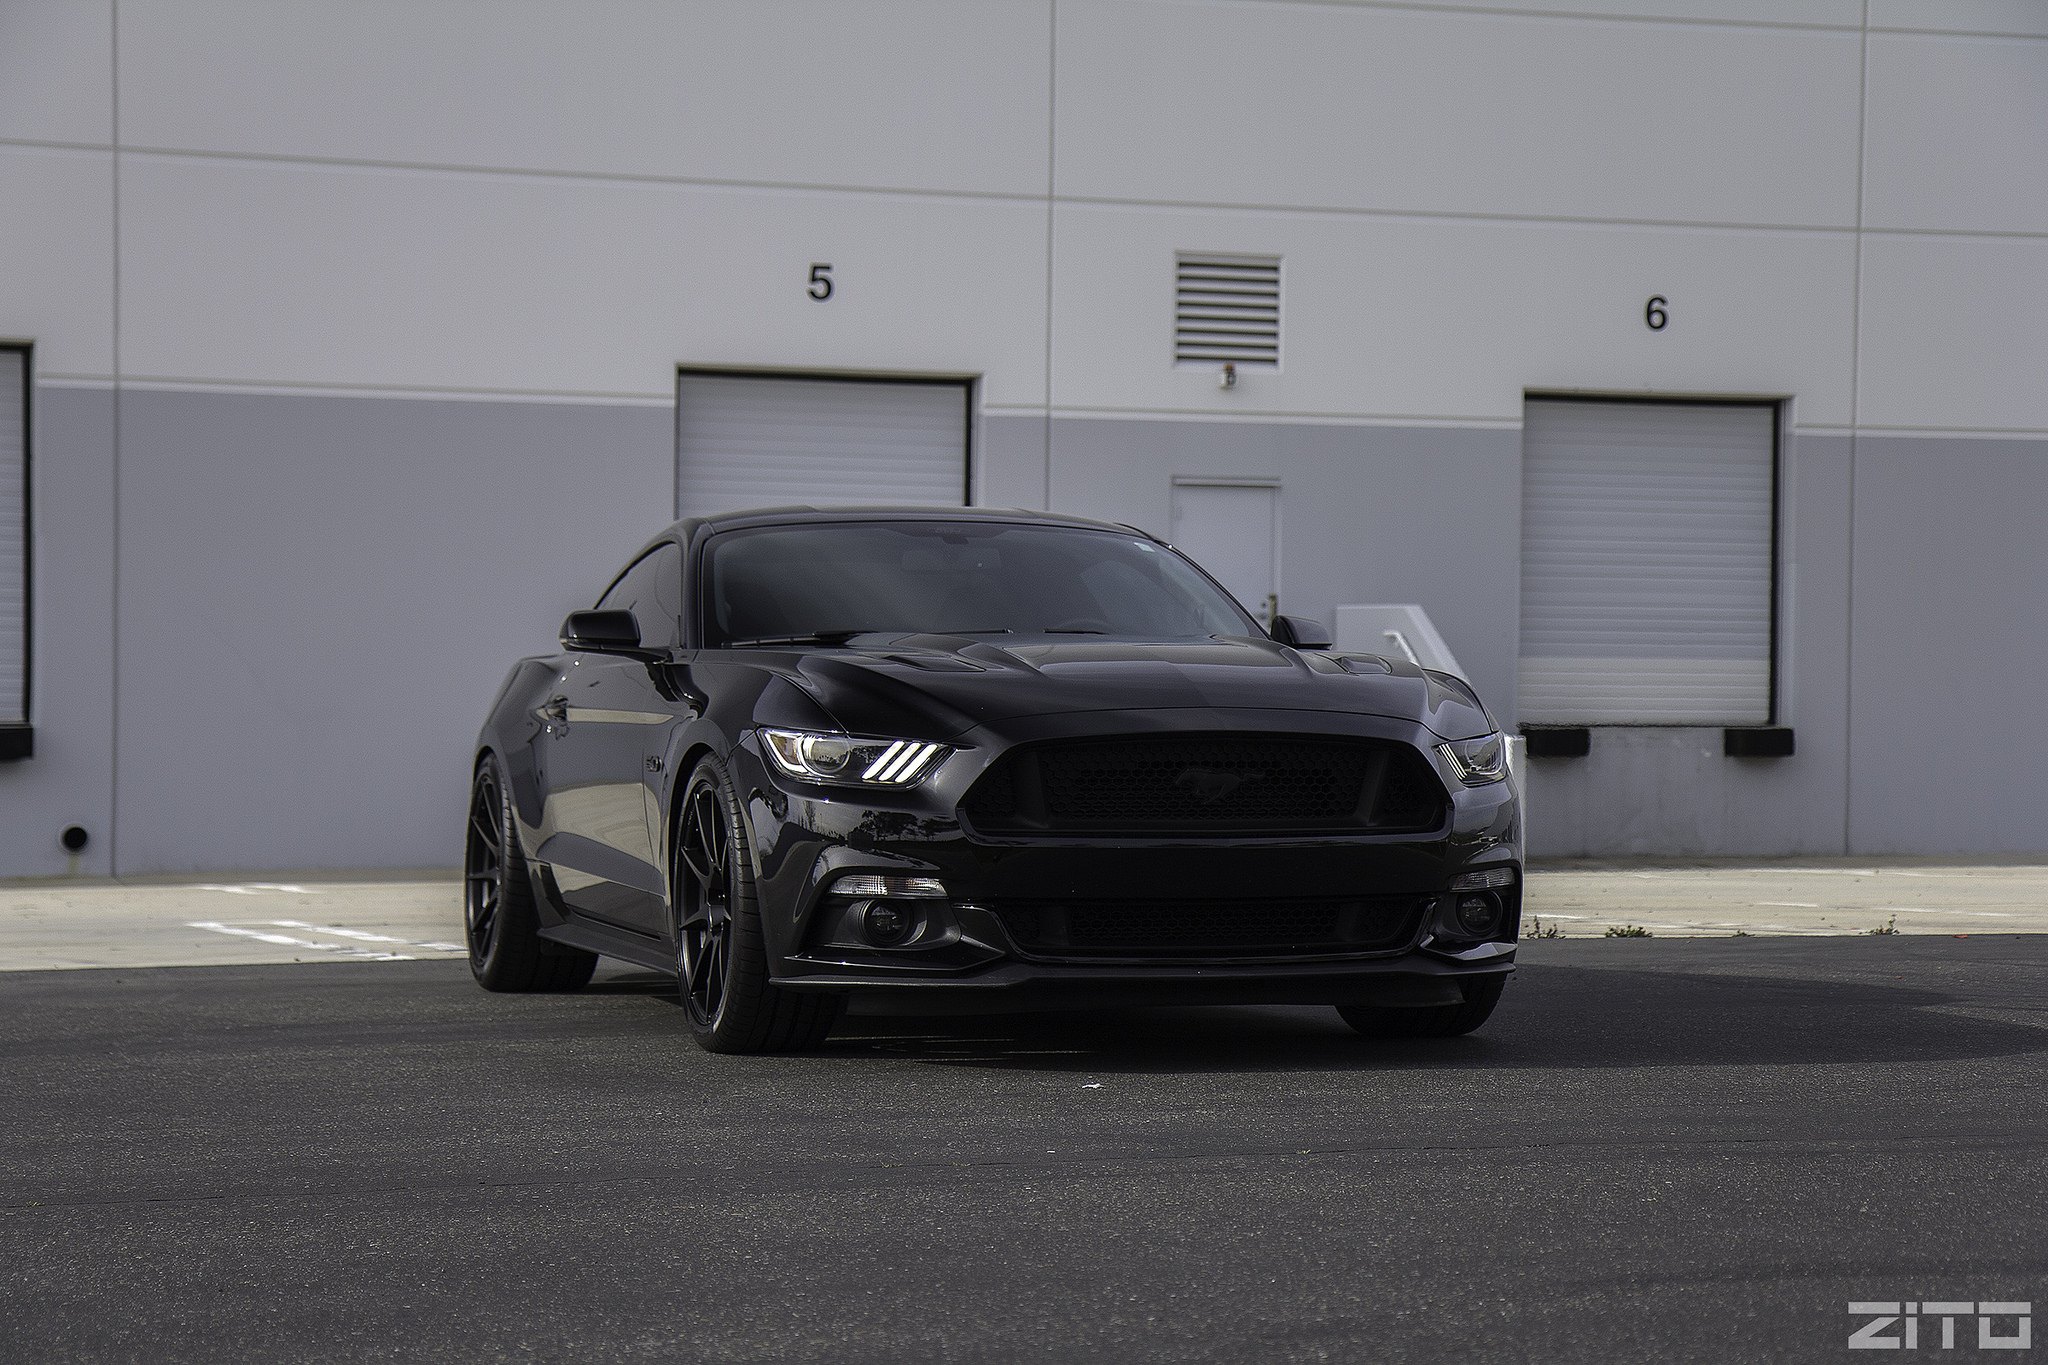 Front Bumper with Fog Lights on Black Ford Mustang - Photo by Zito Wheels